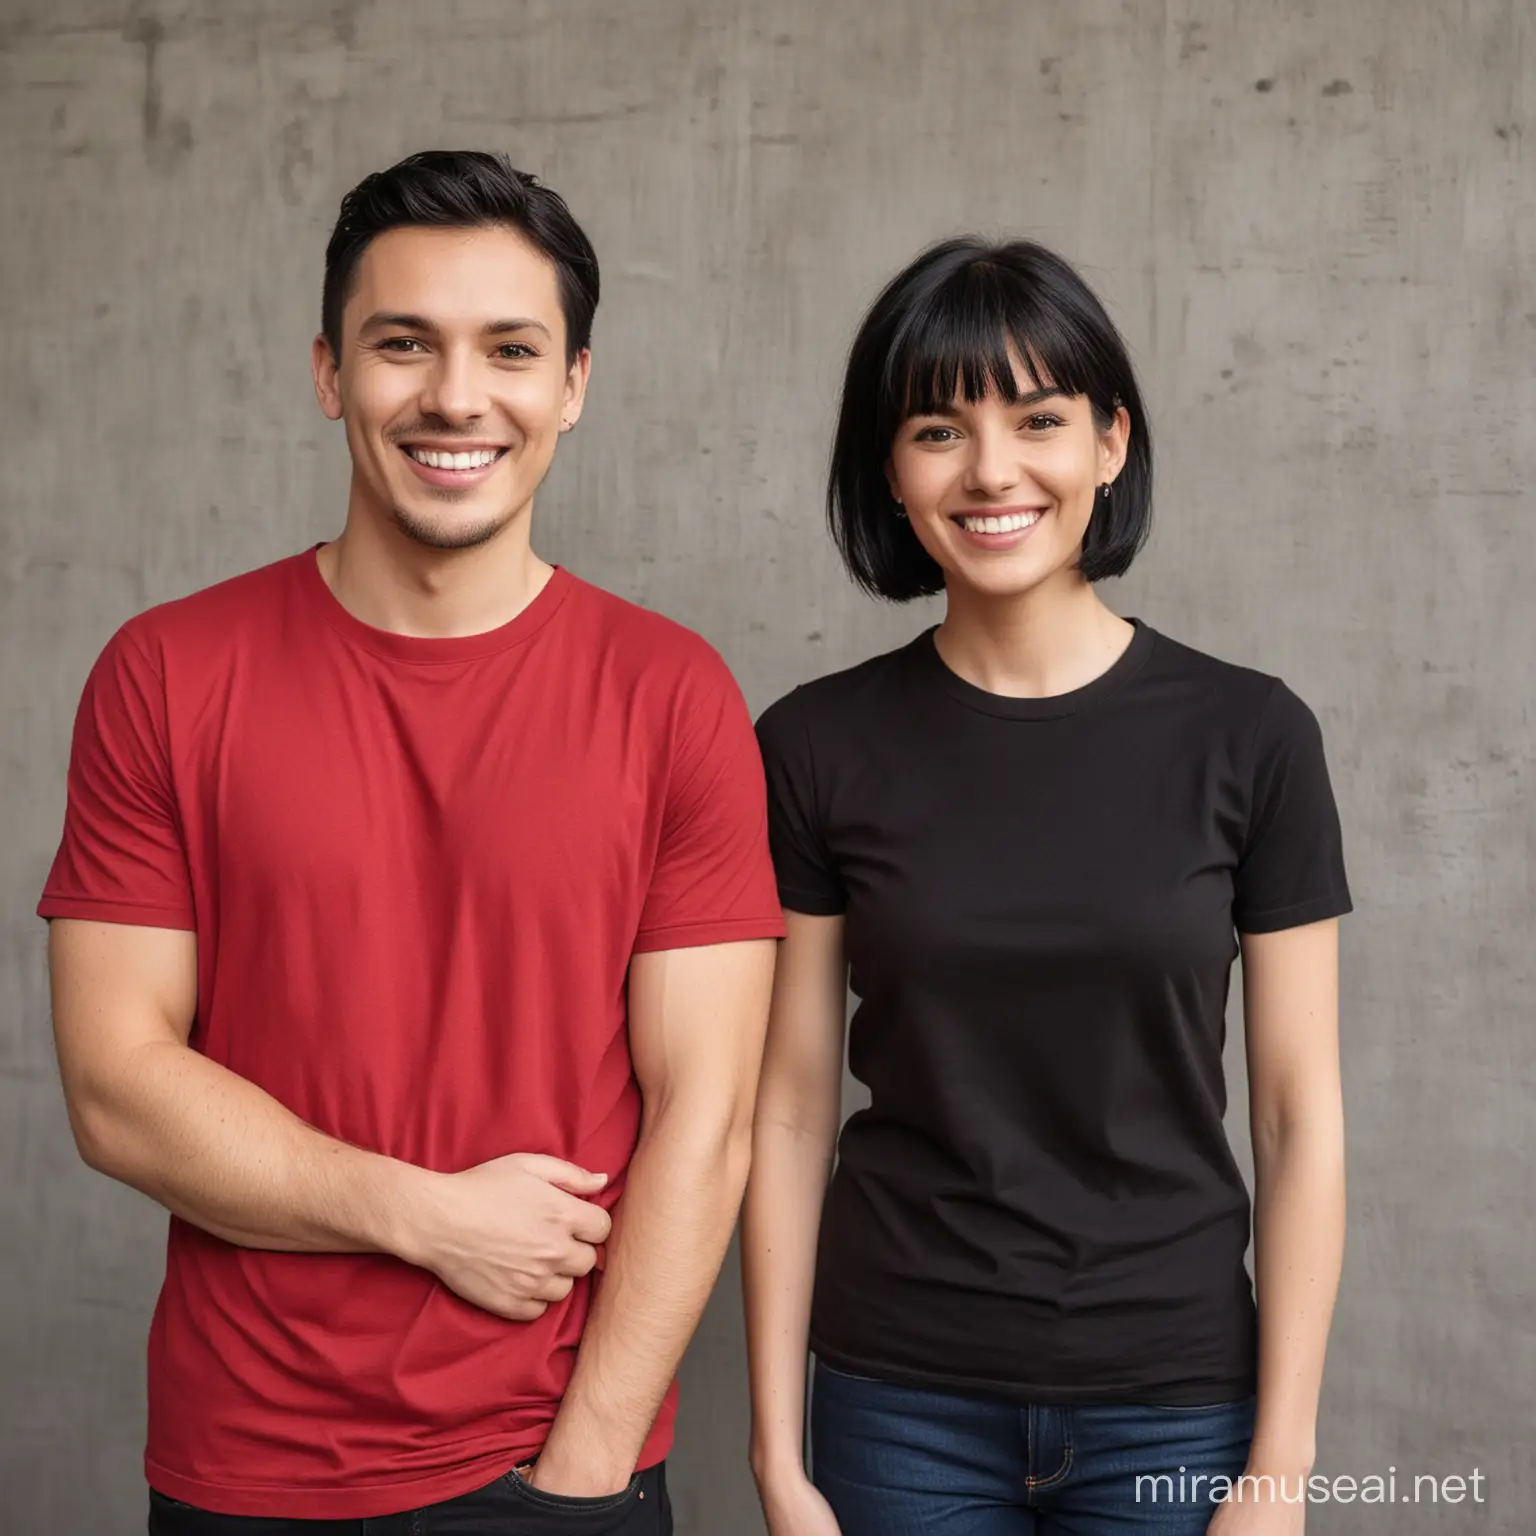 Couple in Casual Attire Posing Happily